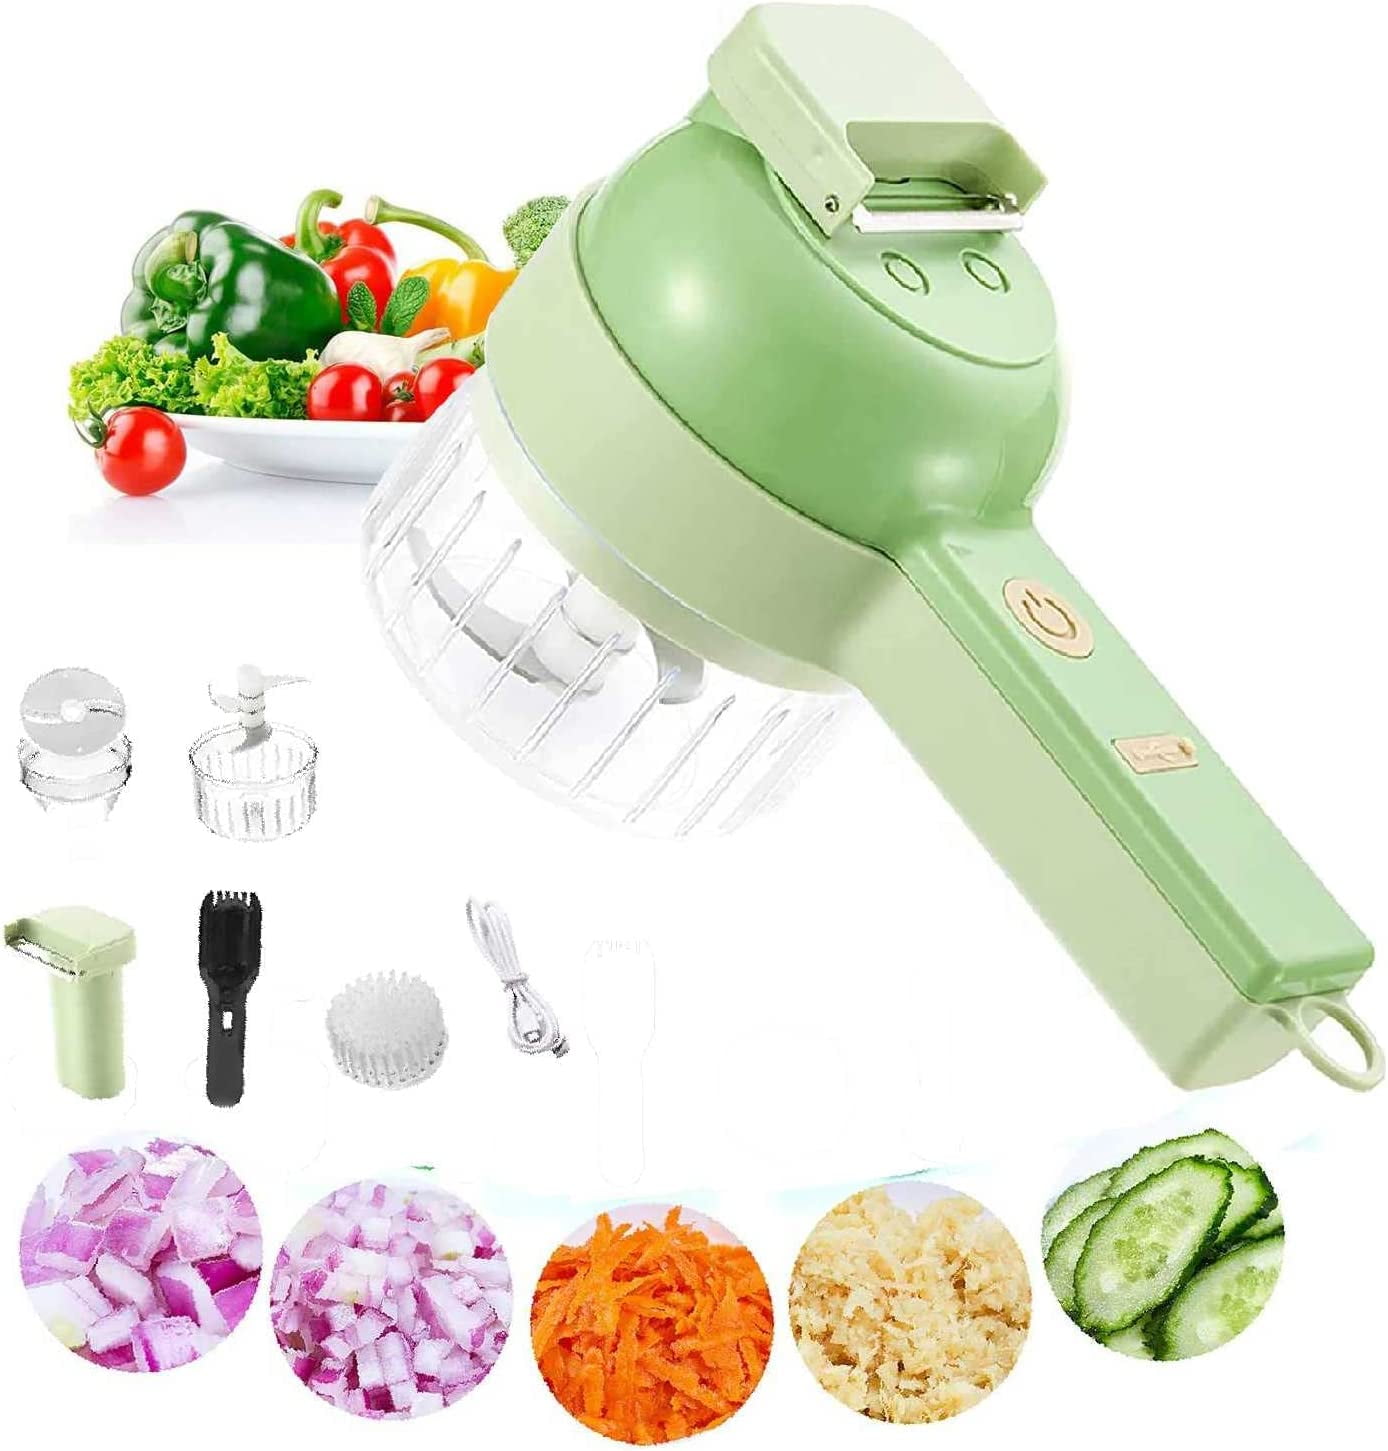 Kitchen Goods Electric Vegetable Cutter Set - 4 in 1 Portable, Rechargeable, Wireless Food Processor & Chopper Machine for Pepper, Garlic, Onion